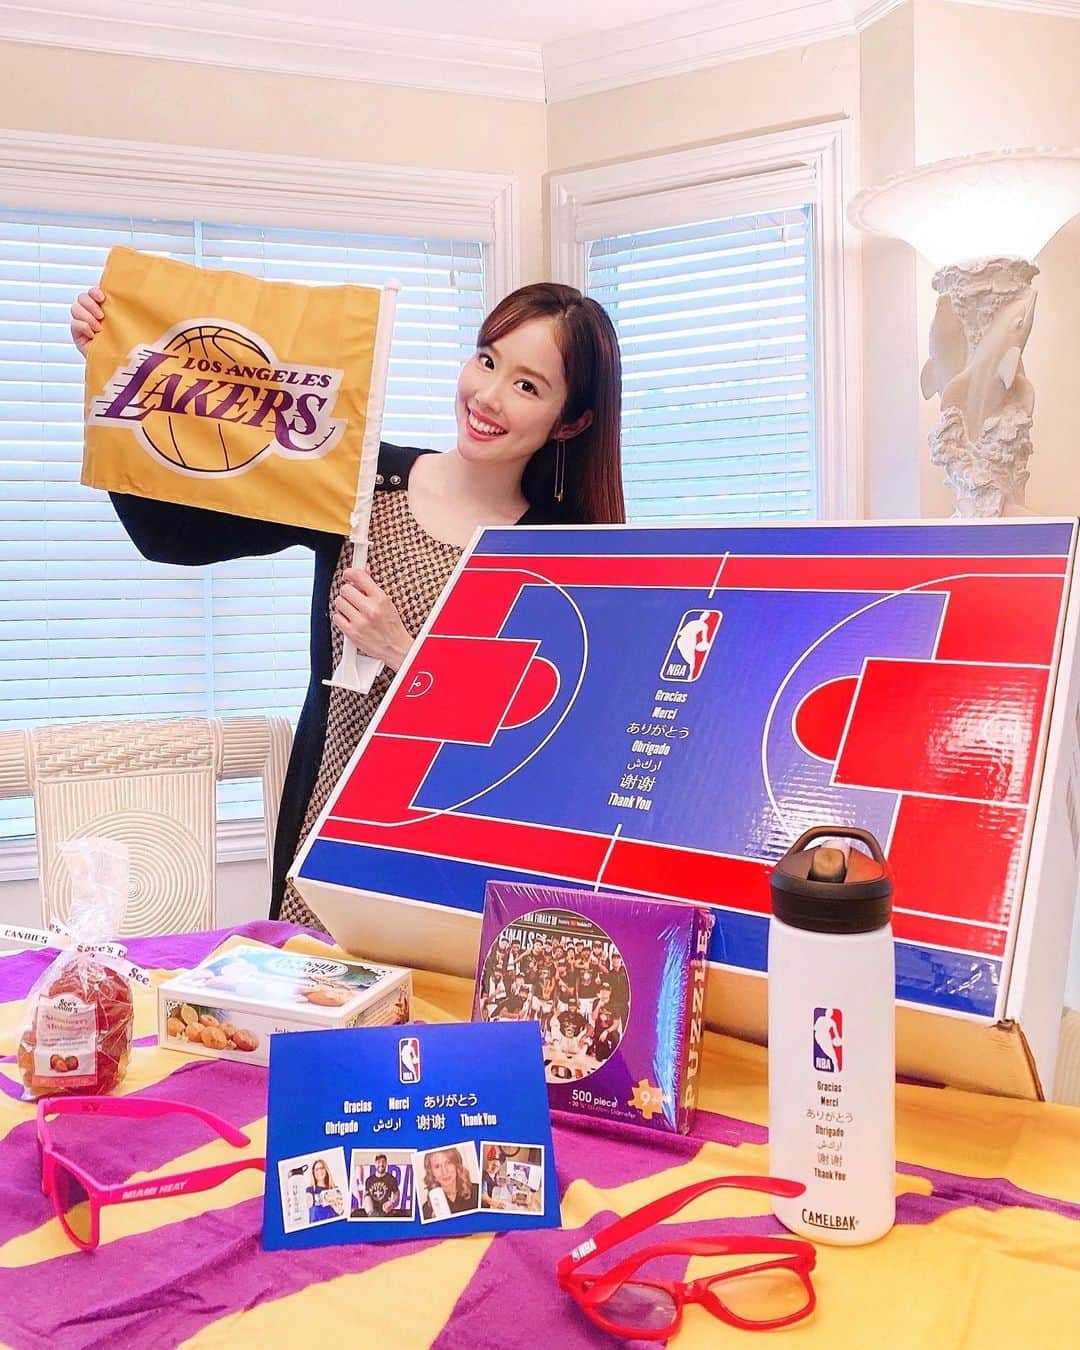 メロディー・モリタのインスタグラム：「Received wonderful gifts from the @NBA!😆🏀✨ The 2020-2021 season has begun tonight, and all these goodies are going to make me even more pumped for all the NBA action🙌  Kevin Durant made his comeback to an NBA season game for the first time since Game 5 of the 2018-2019 Finals! New head coach and legend Steve Nash shared that "Durant is 90-99% back", and KD certainly proved that with 22pts including his massive dunk against his former team🔥 His Brooklyn Nets debut and Kyrie Irving being on fire definitely got tons of NBA fans up on their feet!  Next up is @lakers VS @laclippers! Being from LA, this is another matchup I've been really looking forward to. Be sure to tune in to the games🙌 I can't wait for all the historical moments to come this season!!✨  Thank you always, @NBA! appreciate the thoughtful gifts and sweet card.☺️❤️  本日2020-2021年シーズンが開幕したNBAから素敵なギフトが届きました！😊🏀✨ 昨シーズン優勝したレイカーズのグッズなど、多くのNBAアイテムに触れると本当に気分が上がります🙌  オープニングナイトの第一戦では、18-19年シーズンのNBAファイナル第5戦以来の公式戦 復帰となったケビン・デュラント選手がブルックリン・ネッツ デビュー！  新コーチとなったNBAレジェンドのスティーブ・ナッシュさんも試合前から「KDは90~99%復活した」と語っていましたが、 その言葉通り、前所属チームのウォリアーズに対し、KDは豪快なダンクを含む22得点をマークしました‼️カイリー・アービング選手と共に、NBAファンの気持ちが昂る活躍でした👏  続いて、オープニングナイト二戦目となるレイカーズVSクリッパーズはLA対決！私はLA出身なので、こちらのハイレベルゲームも目が離せません👀🔥  NBAはきっと、今シーズンも様々な感動的な試合を私たちに見せてくれるはず✨✨ 皆さんも是非一緒に盛り上がって、楽しんでくださいね！😆 #NBA #NBAOpeningNight #NBAJerseyDay #Interviews #KevinDurant #KyrieIrving #StephenCurry #LeBronJames #Lakers #MelodeeMoritaInterviews」